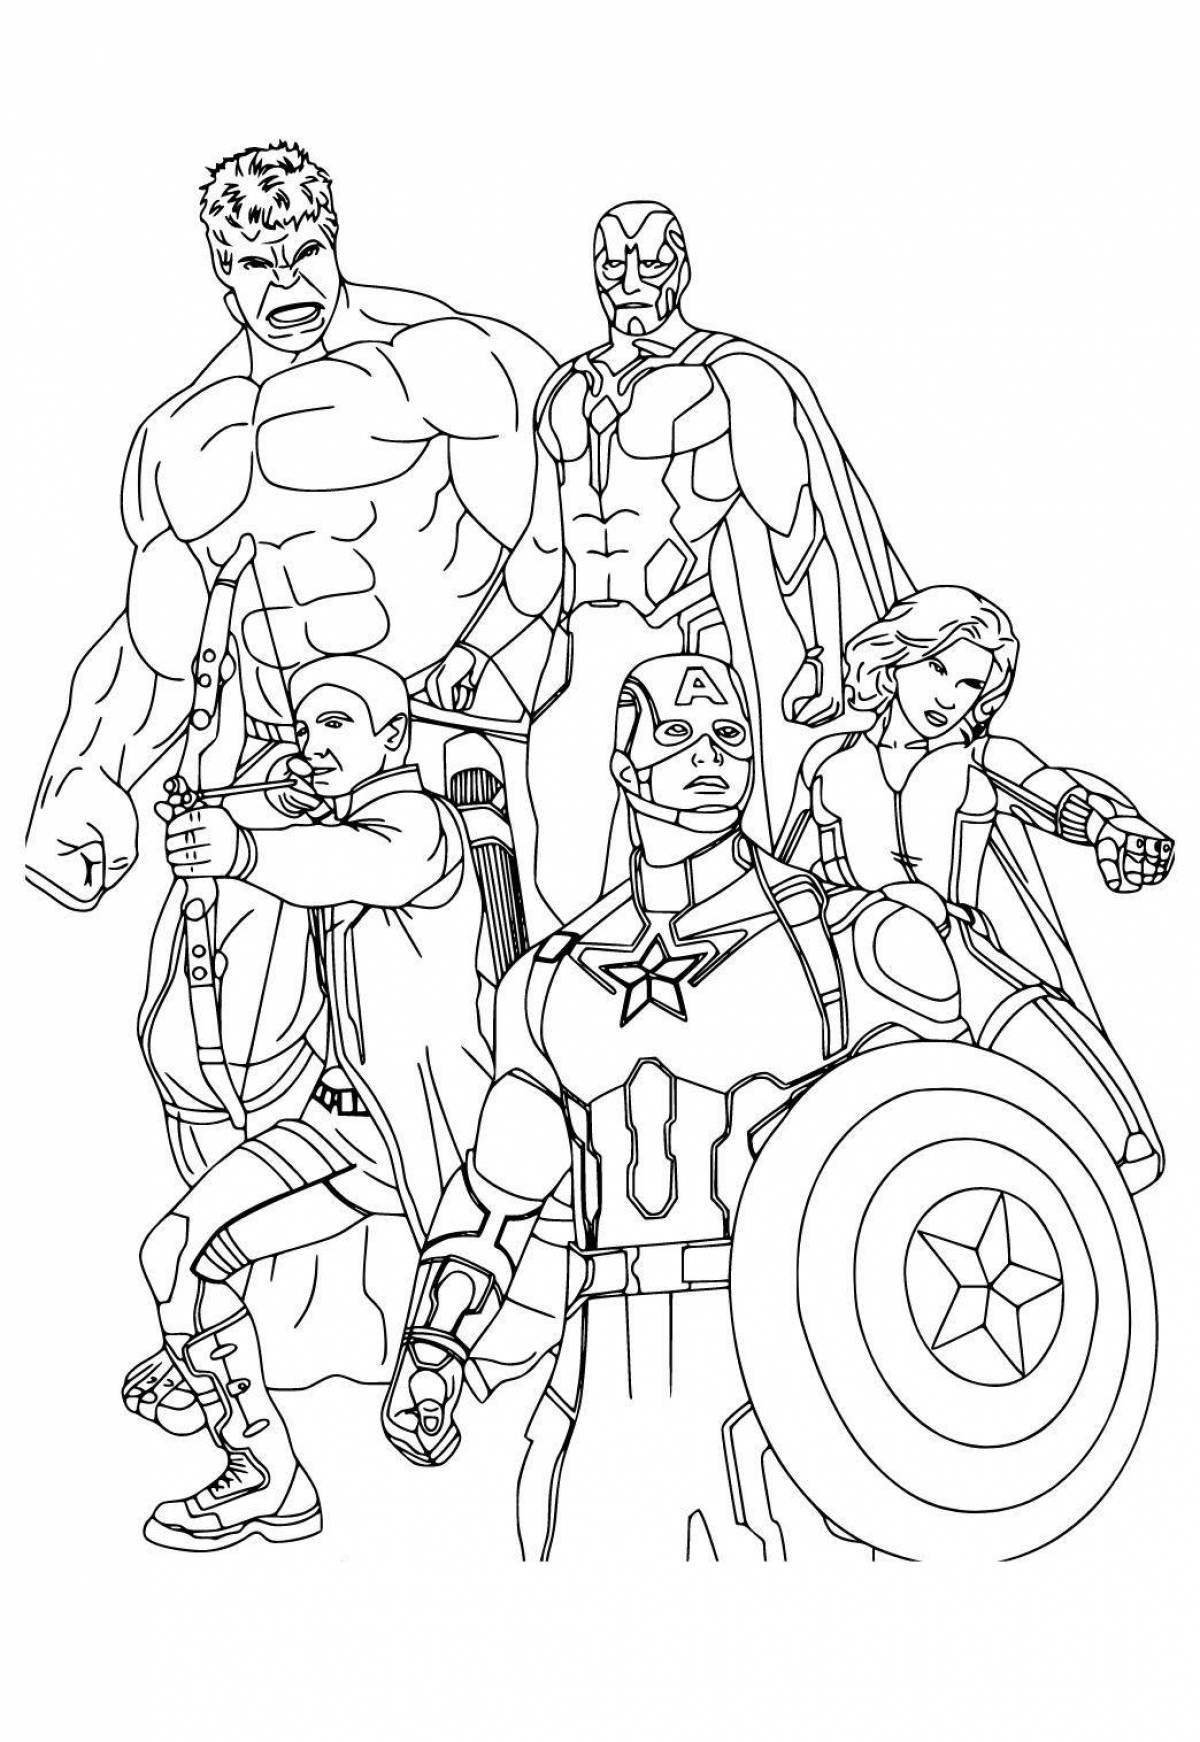 Playful avengers coloring page